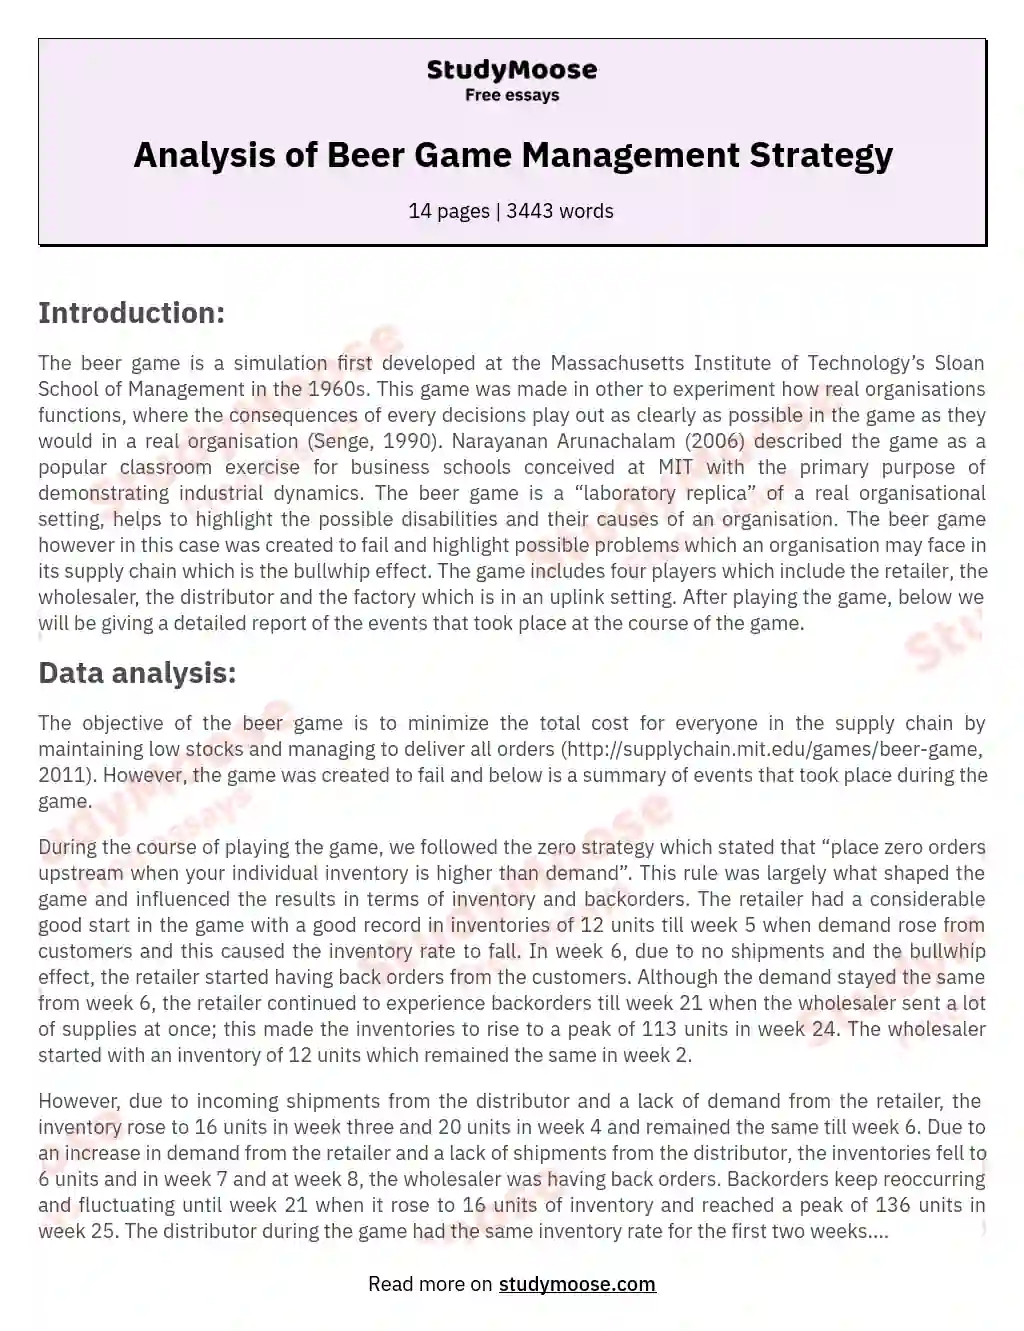 Analysis of Beer Game Management Strategy essay